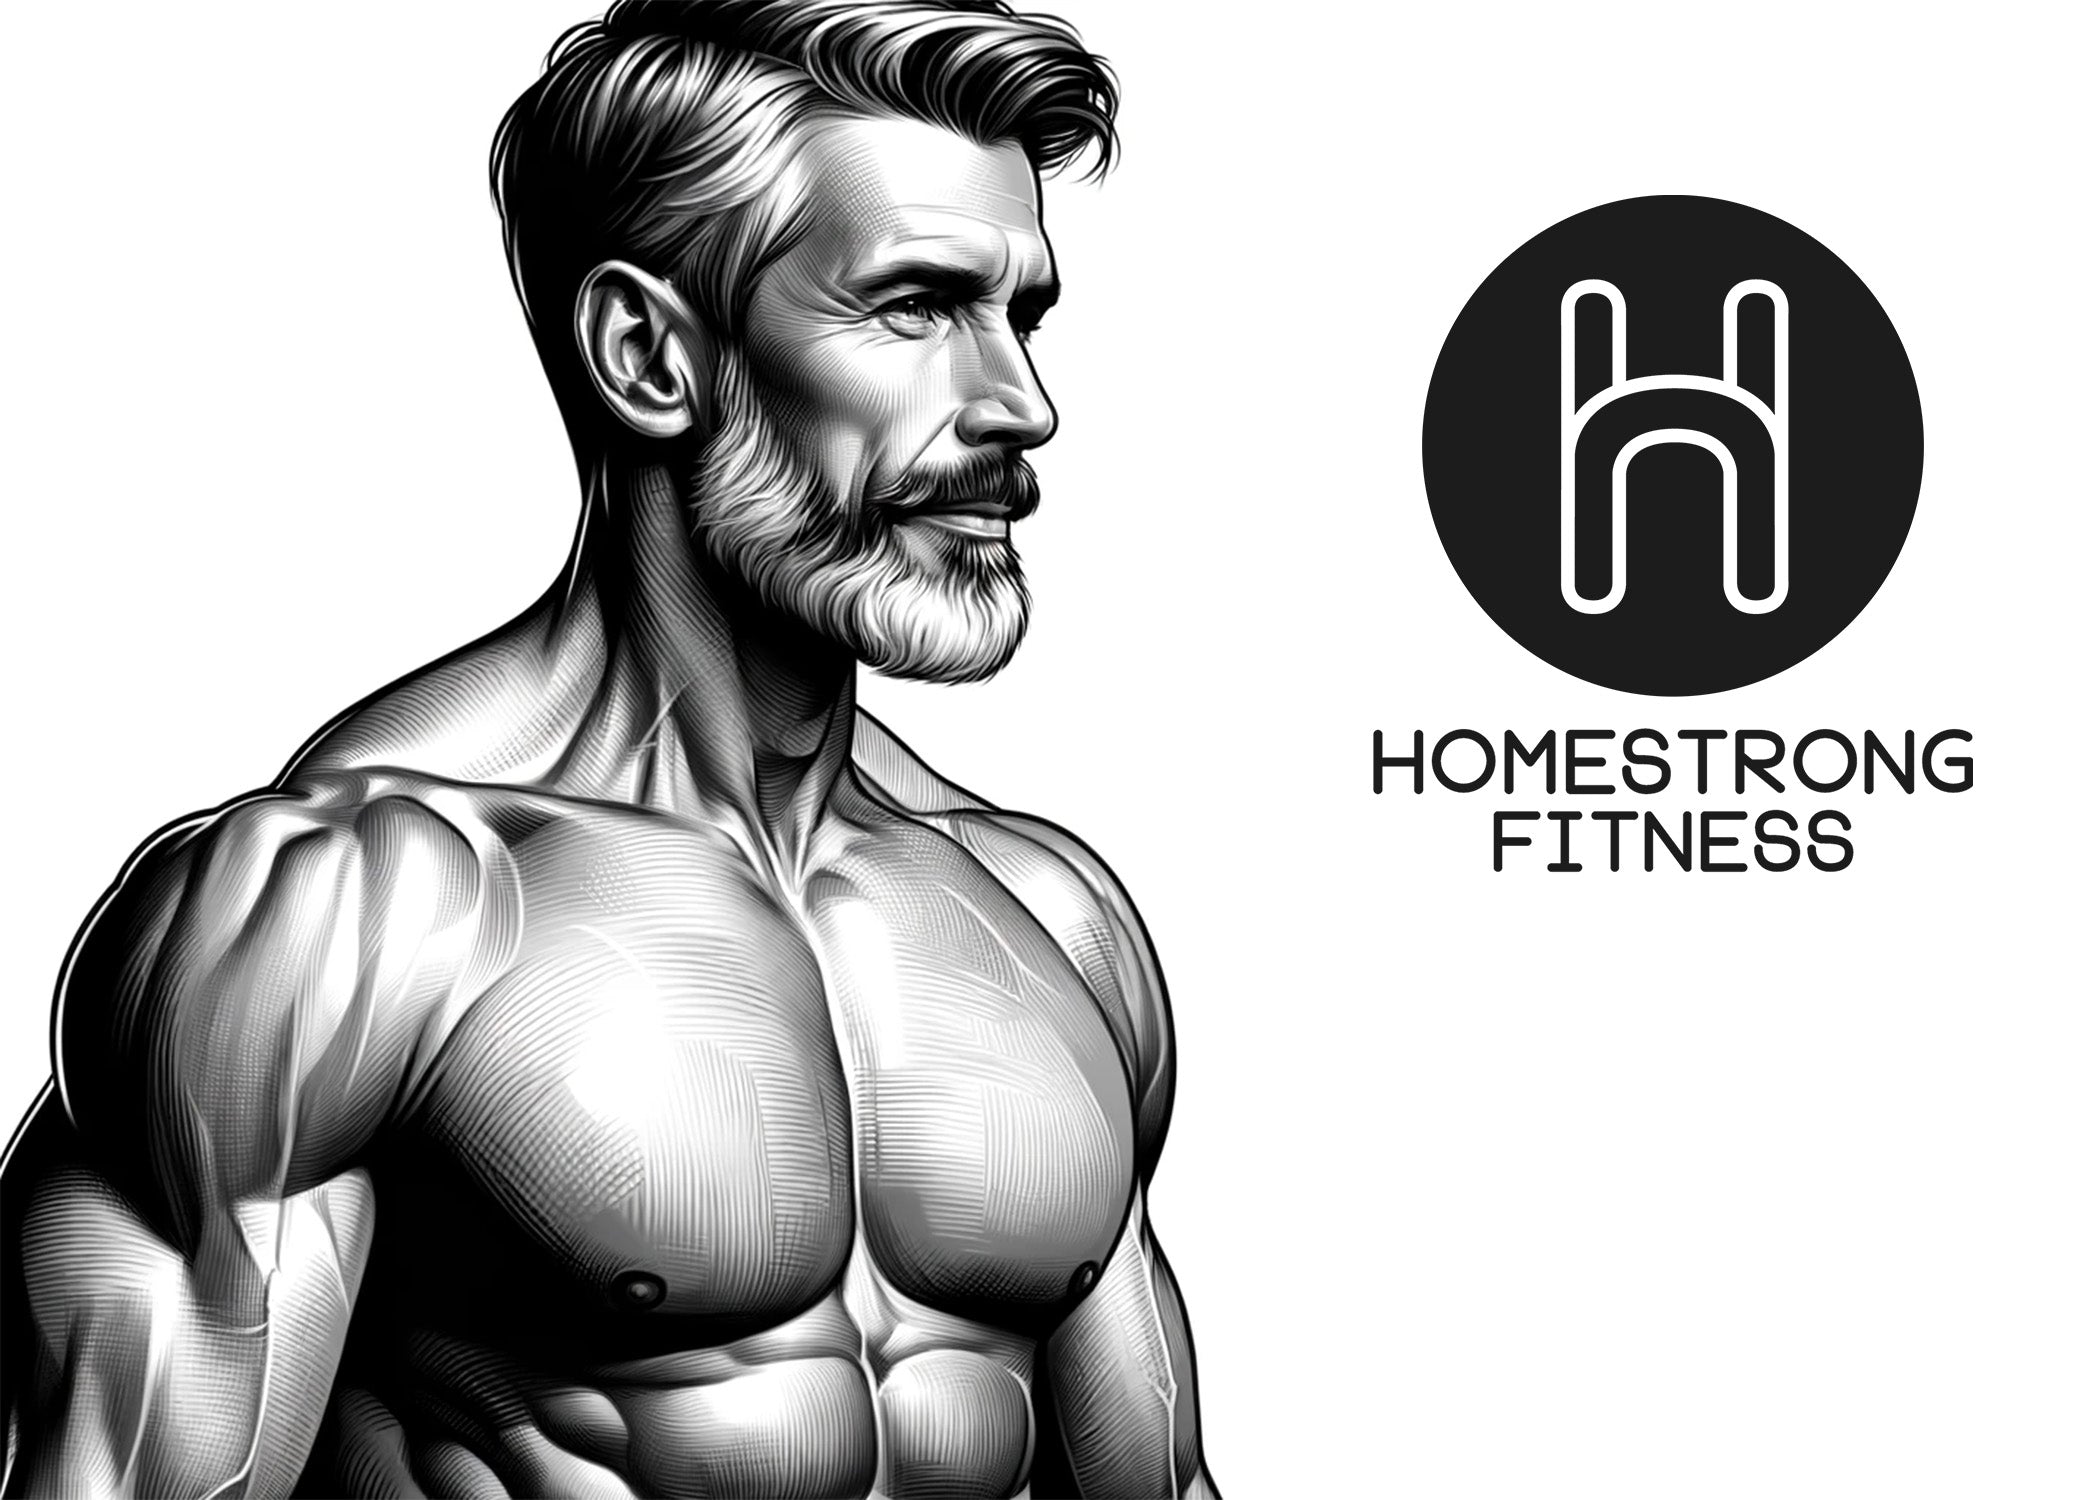 HomeStrong Fitness: Your Guide to Age-Adjusted Exercise for Weight Loss, Vitality, and Muscle Mass